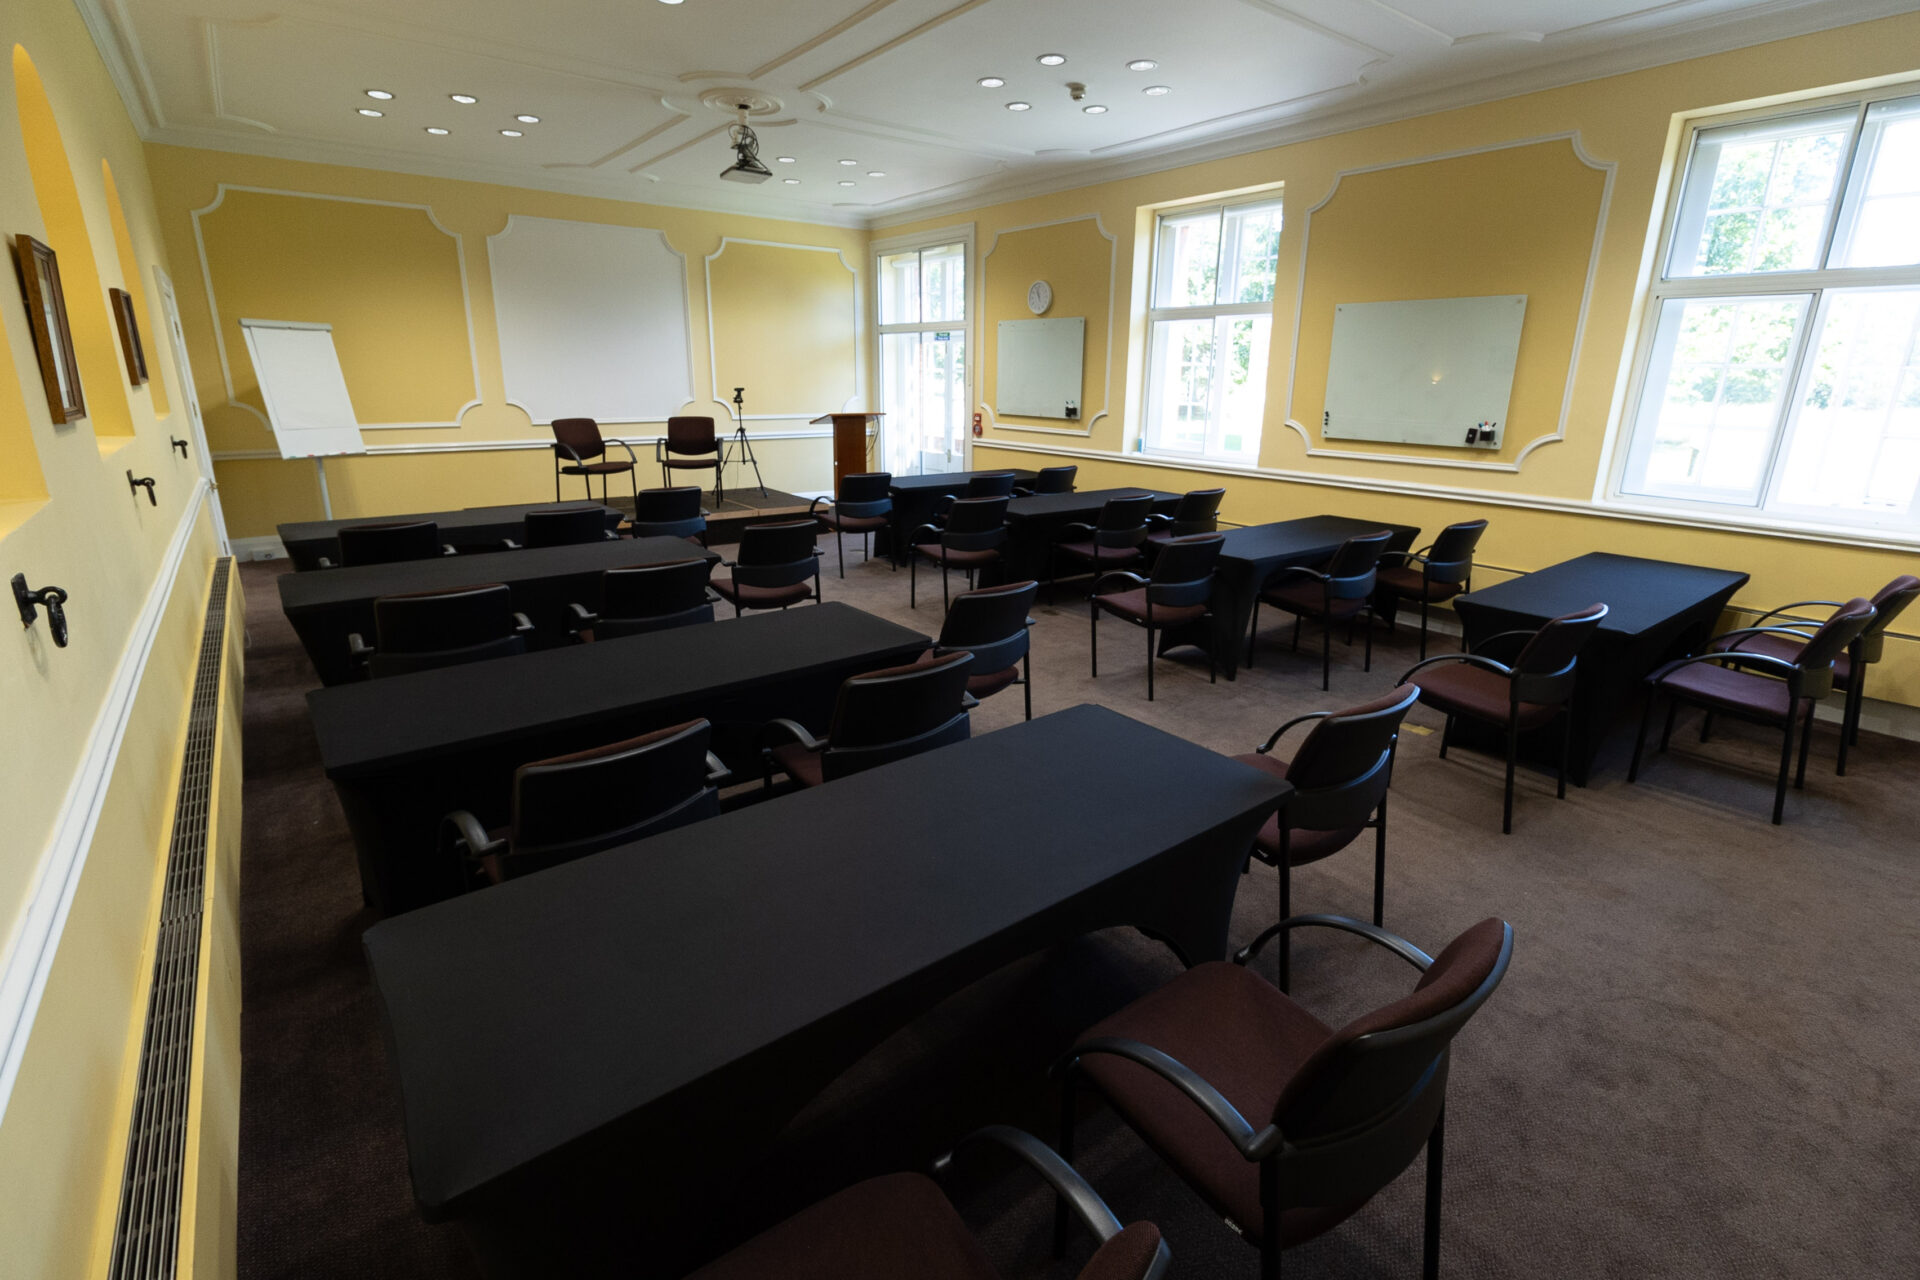 The Sandby conference room, set up in a classroom layout to accommodate up to 24 people.